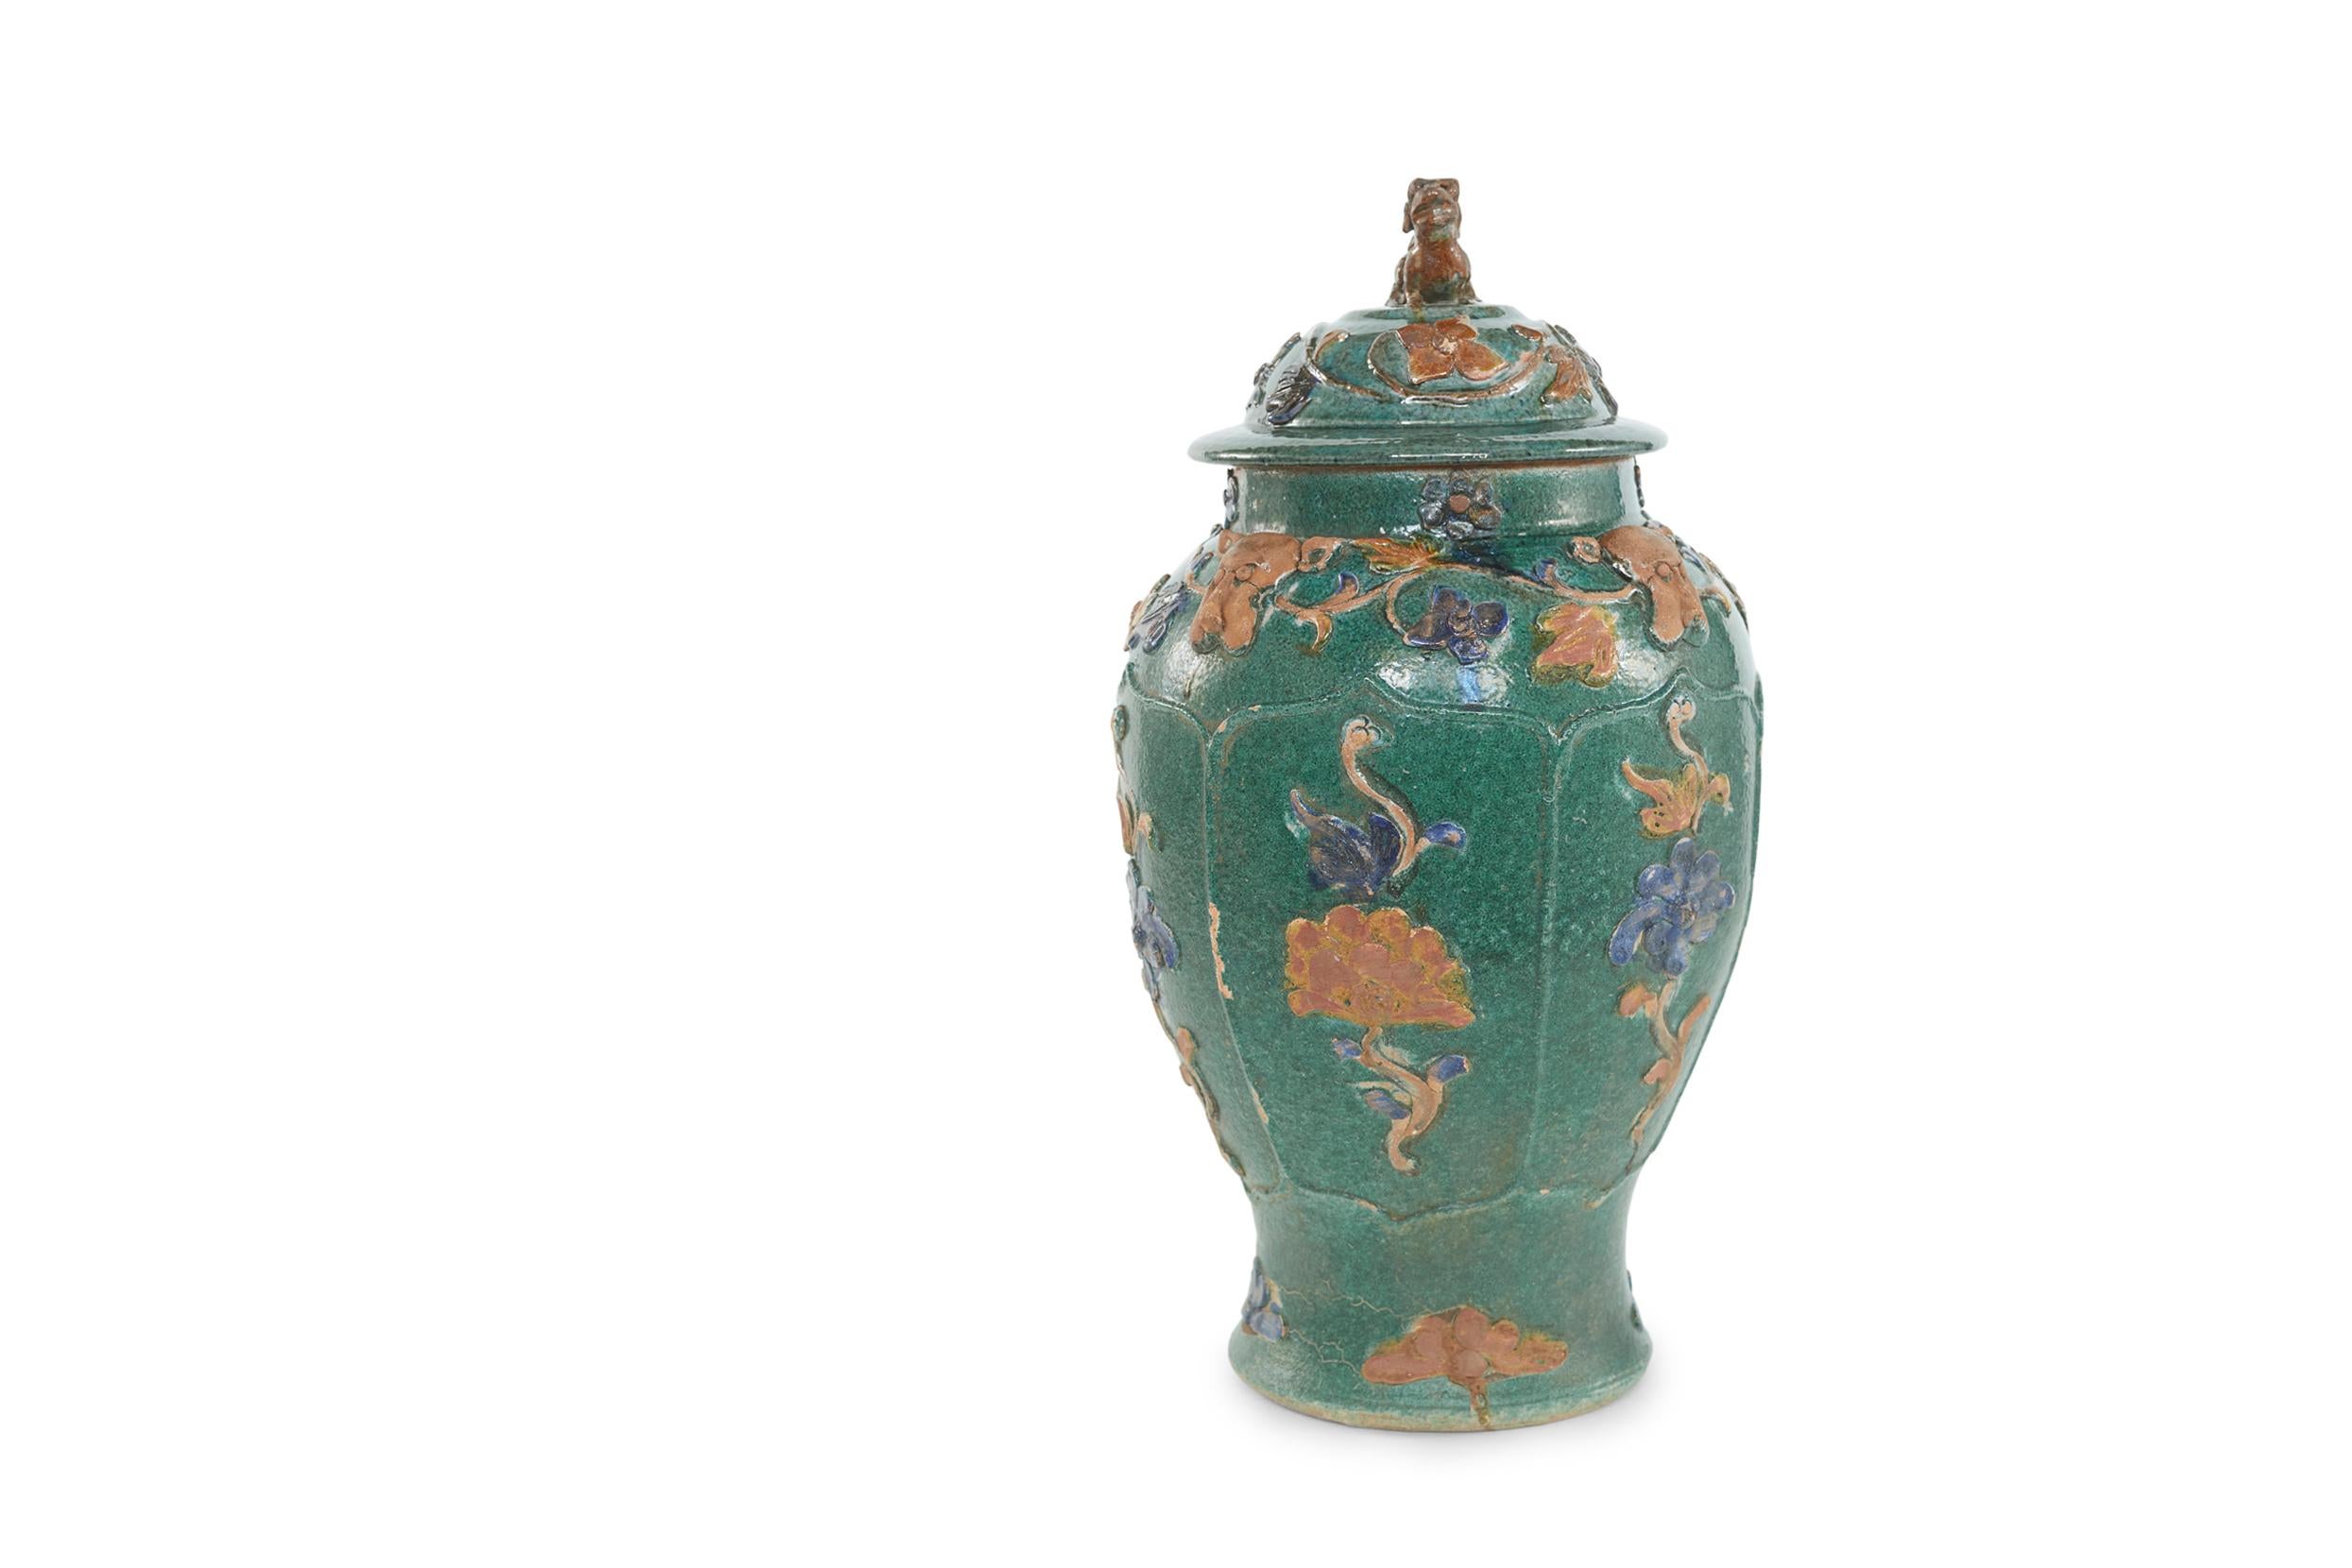 Early 20th century Chinese Sancai glazed earthenware decorative covered jar of an amphora shape & body featuring a continuous motif of blue & red clay flowers, the neck featuring a continuous motif of a flowering vine alternating with dog of Foo